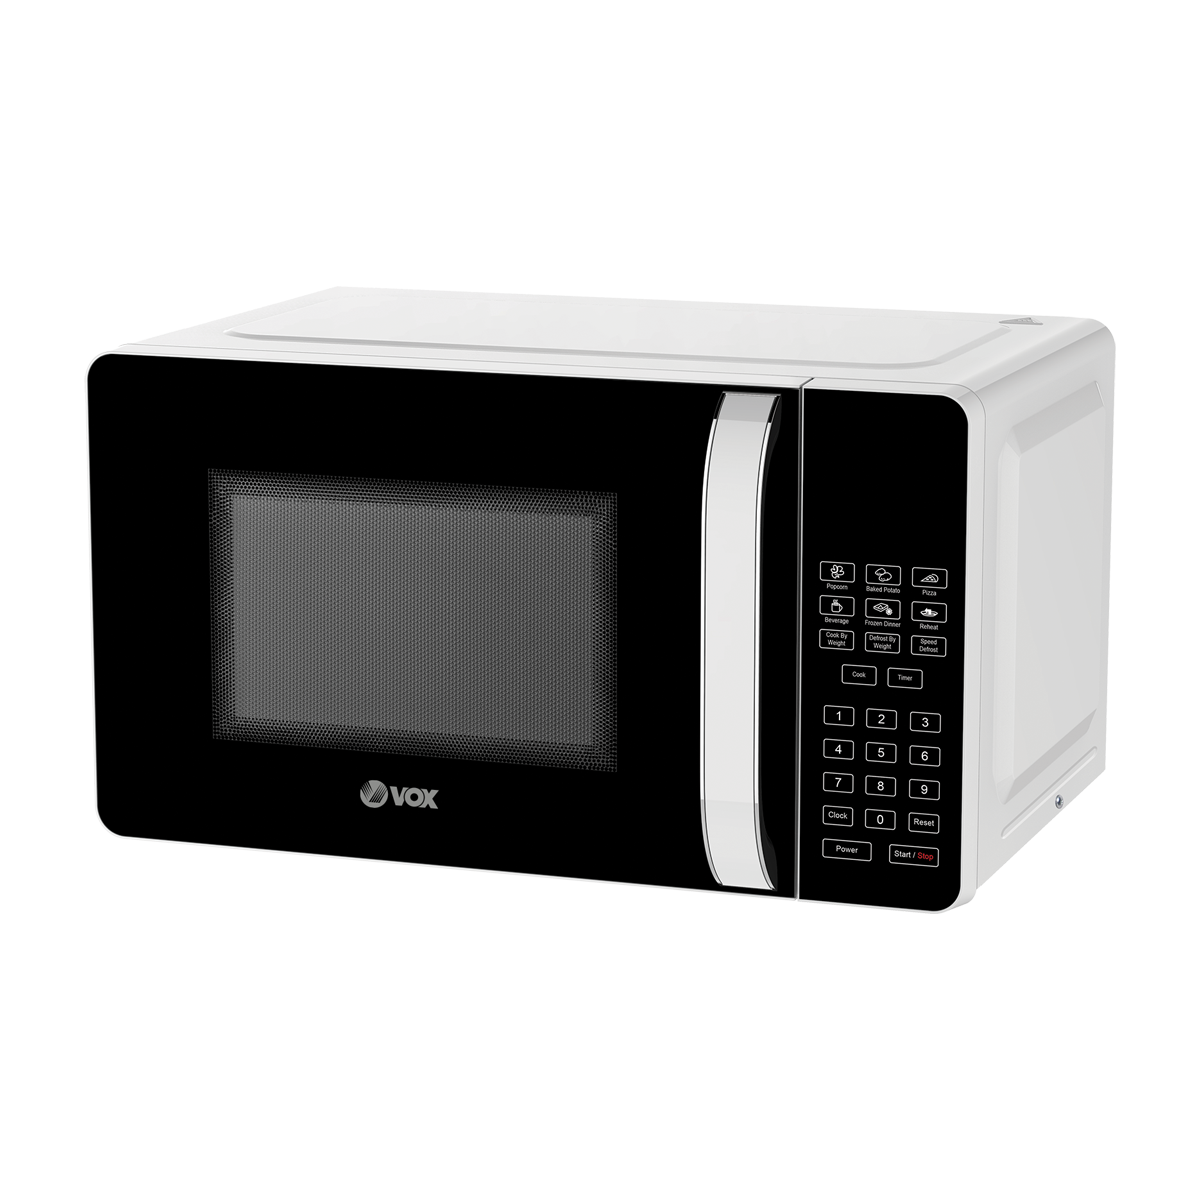 Microwave oven MWH-MD35W 